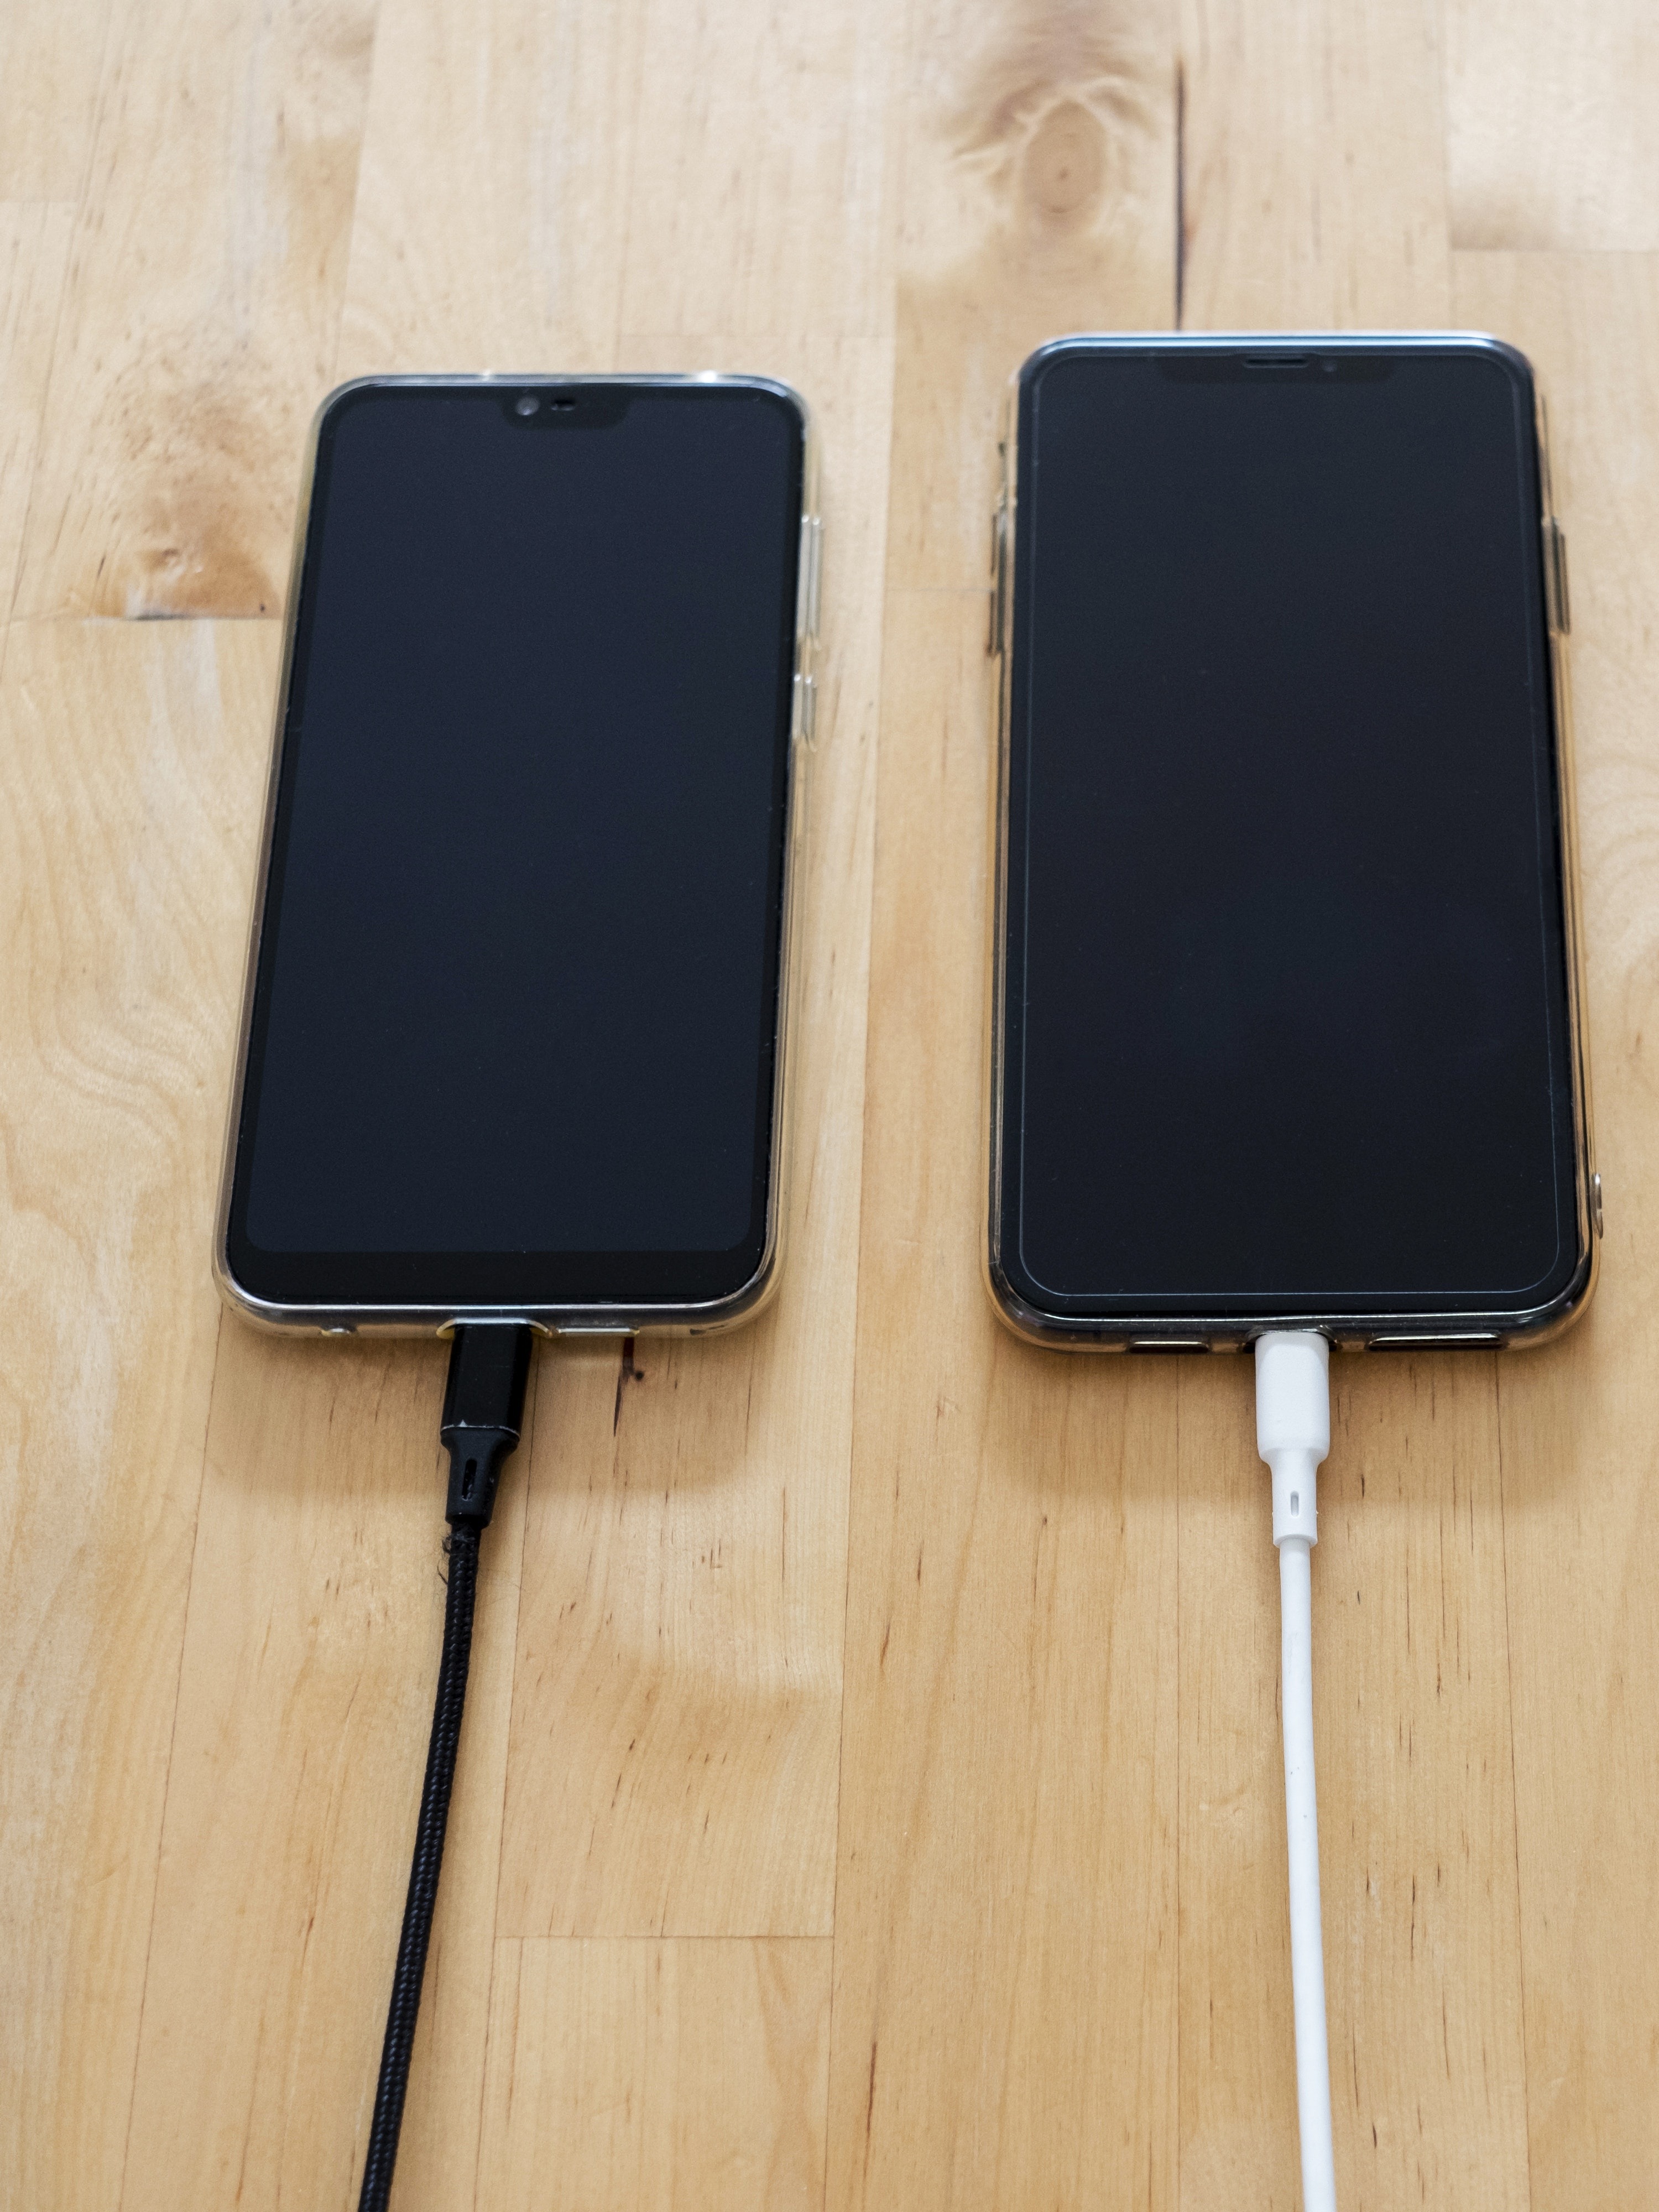 India Sets Deadline For USB C Charging On Mobile Devices